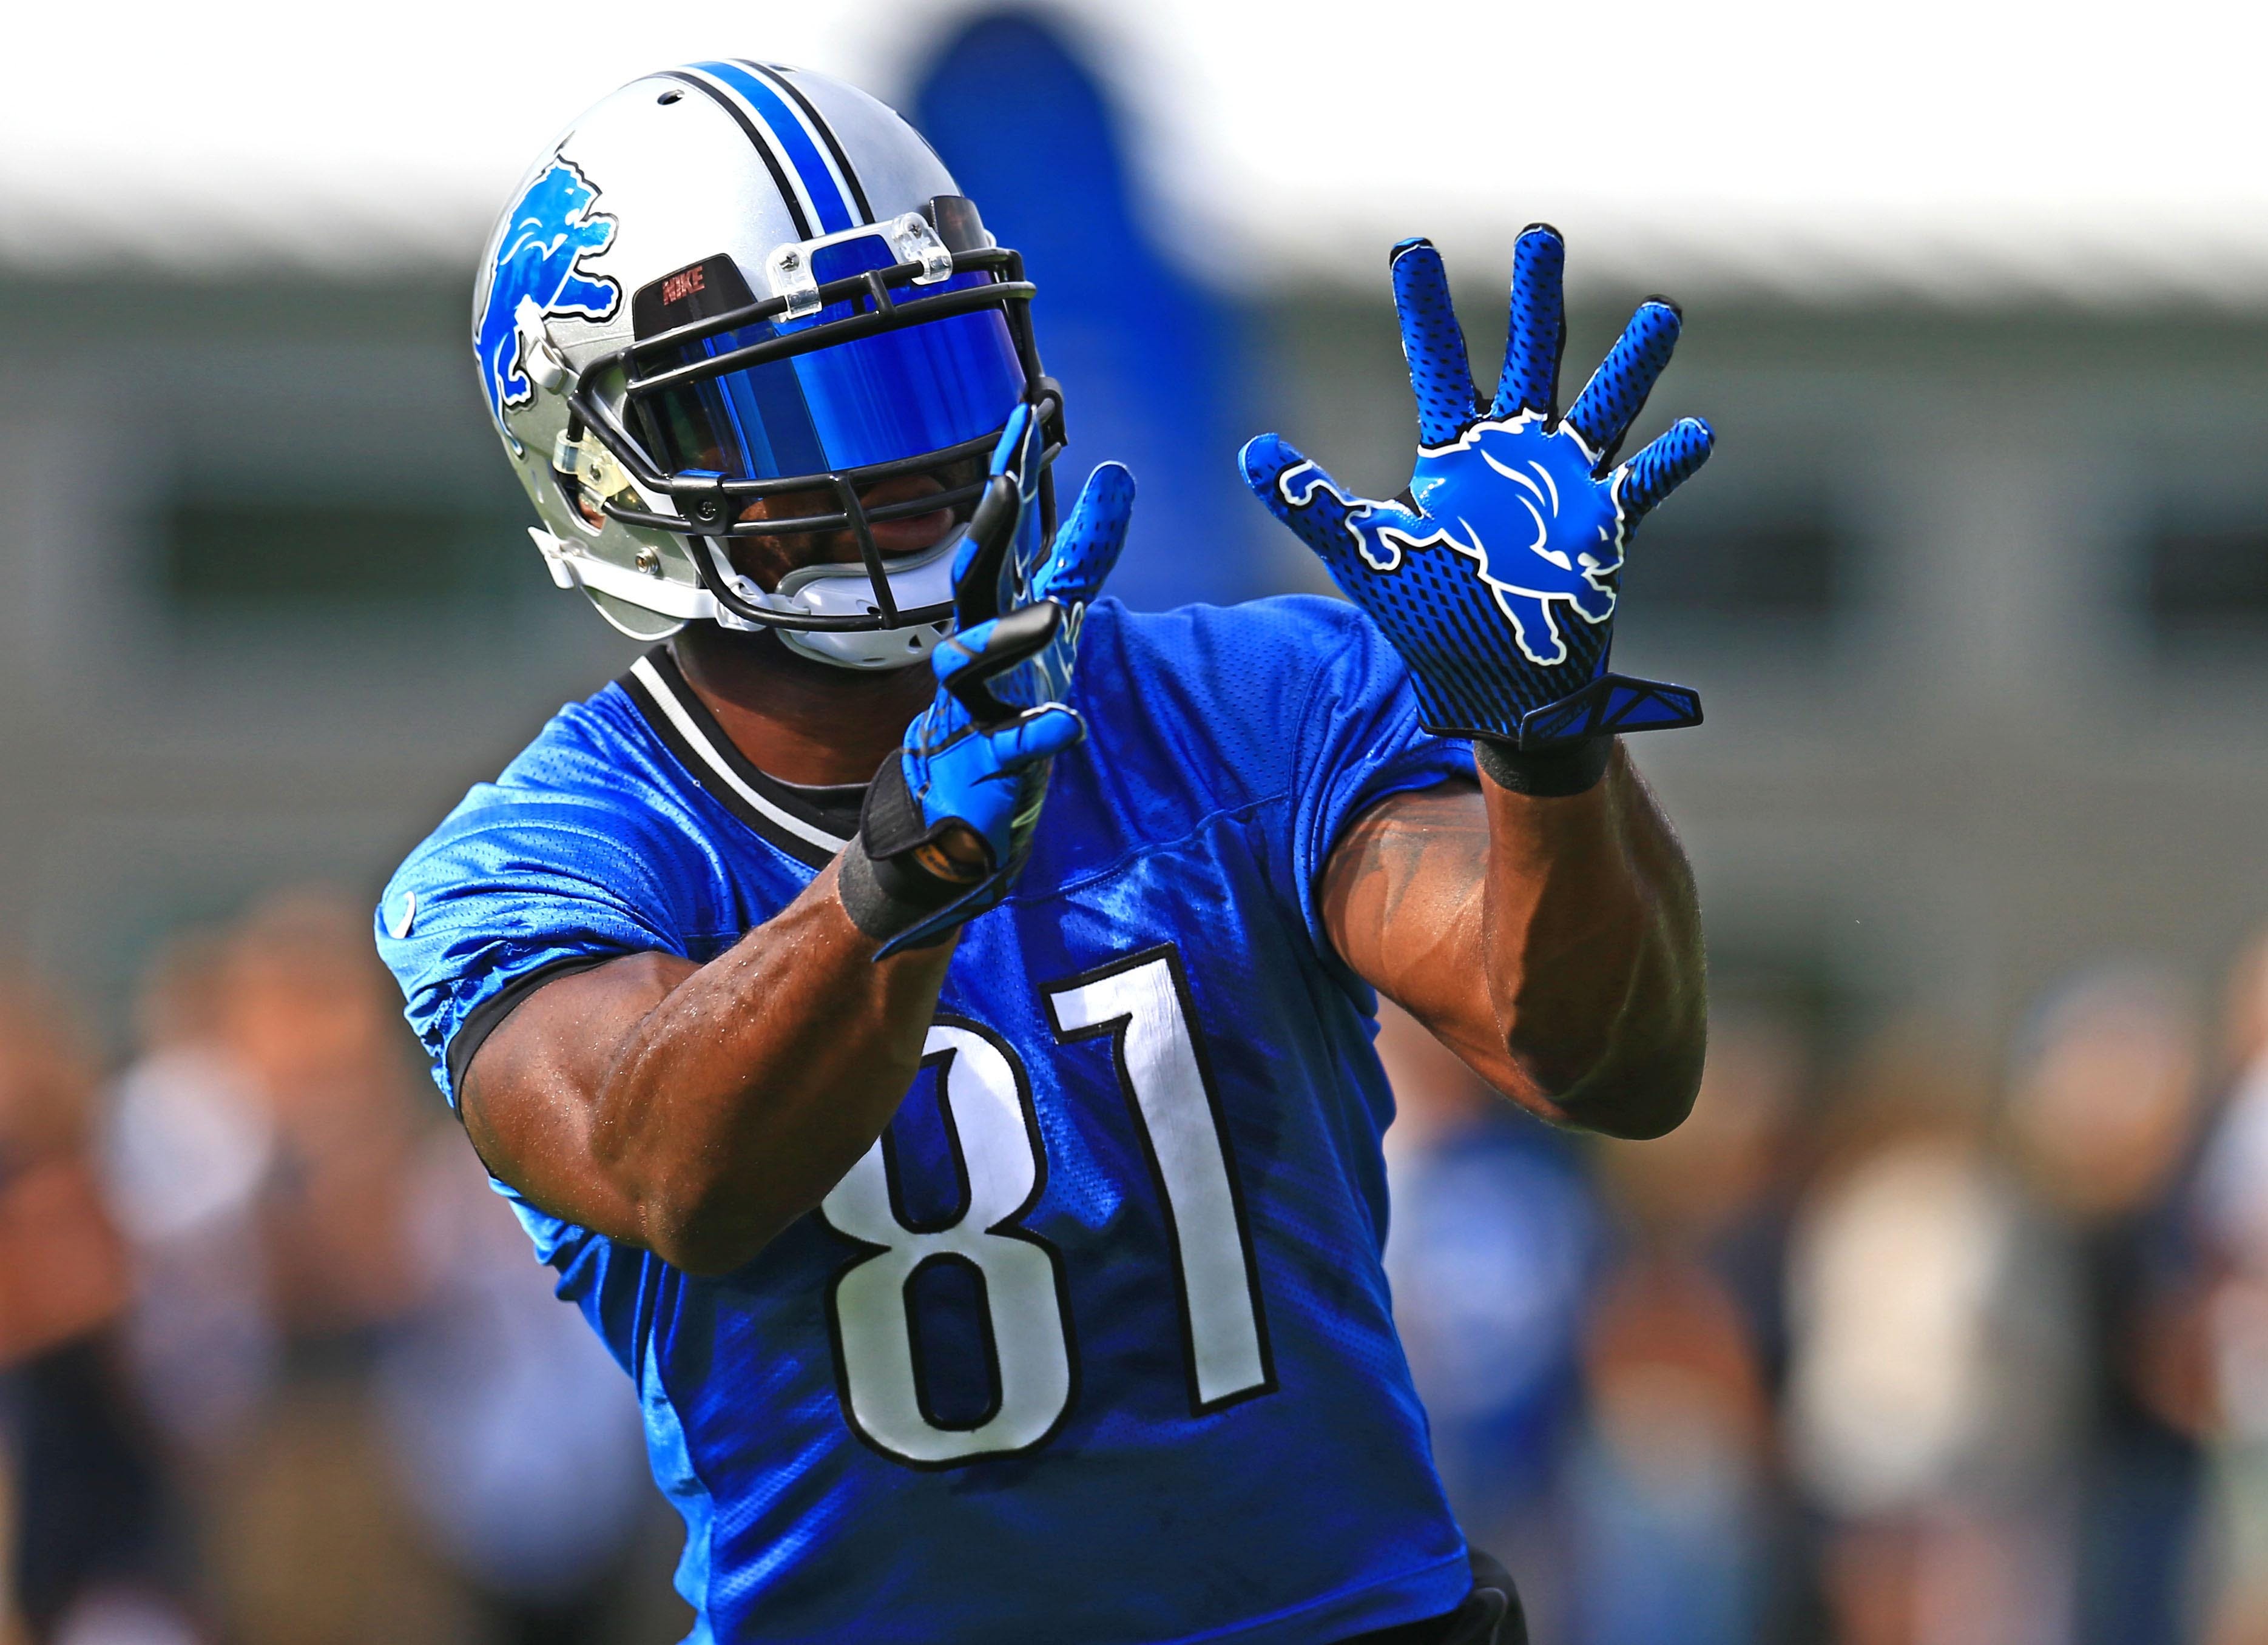 Top wide receivers in fantasy football